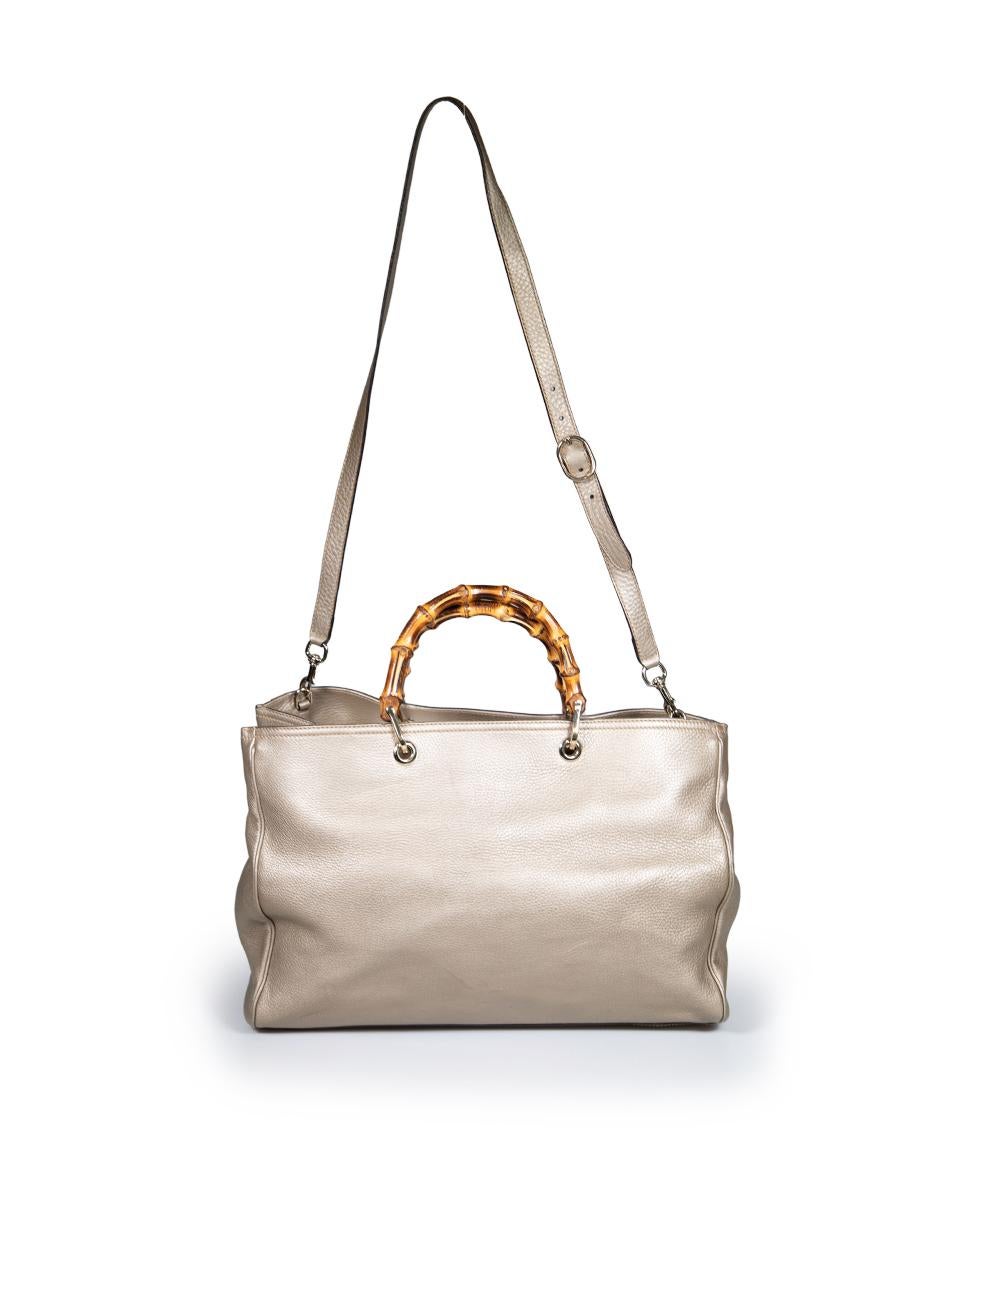 Gucci Taupe Metallic Leather Bamboo Handbag In Excellent Condition For Sale In London, GB